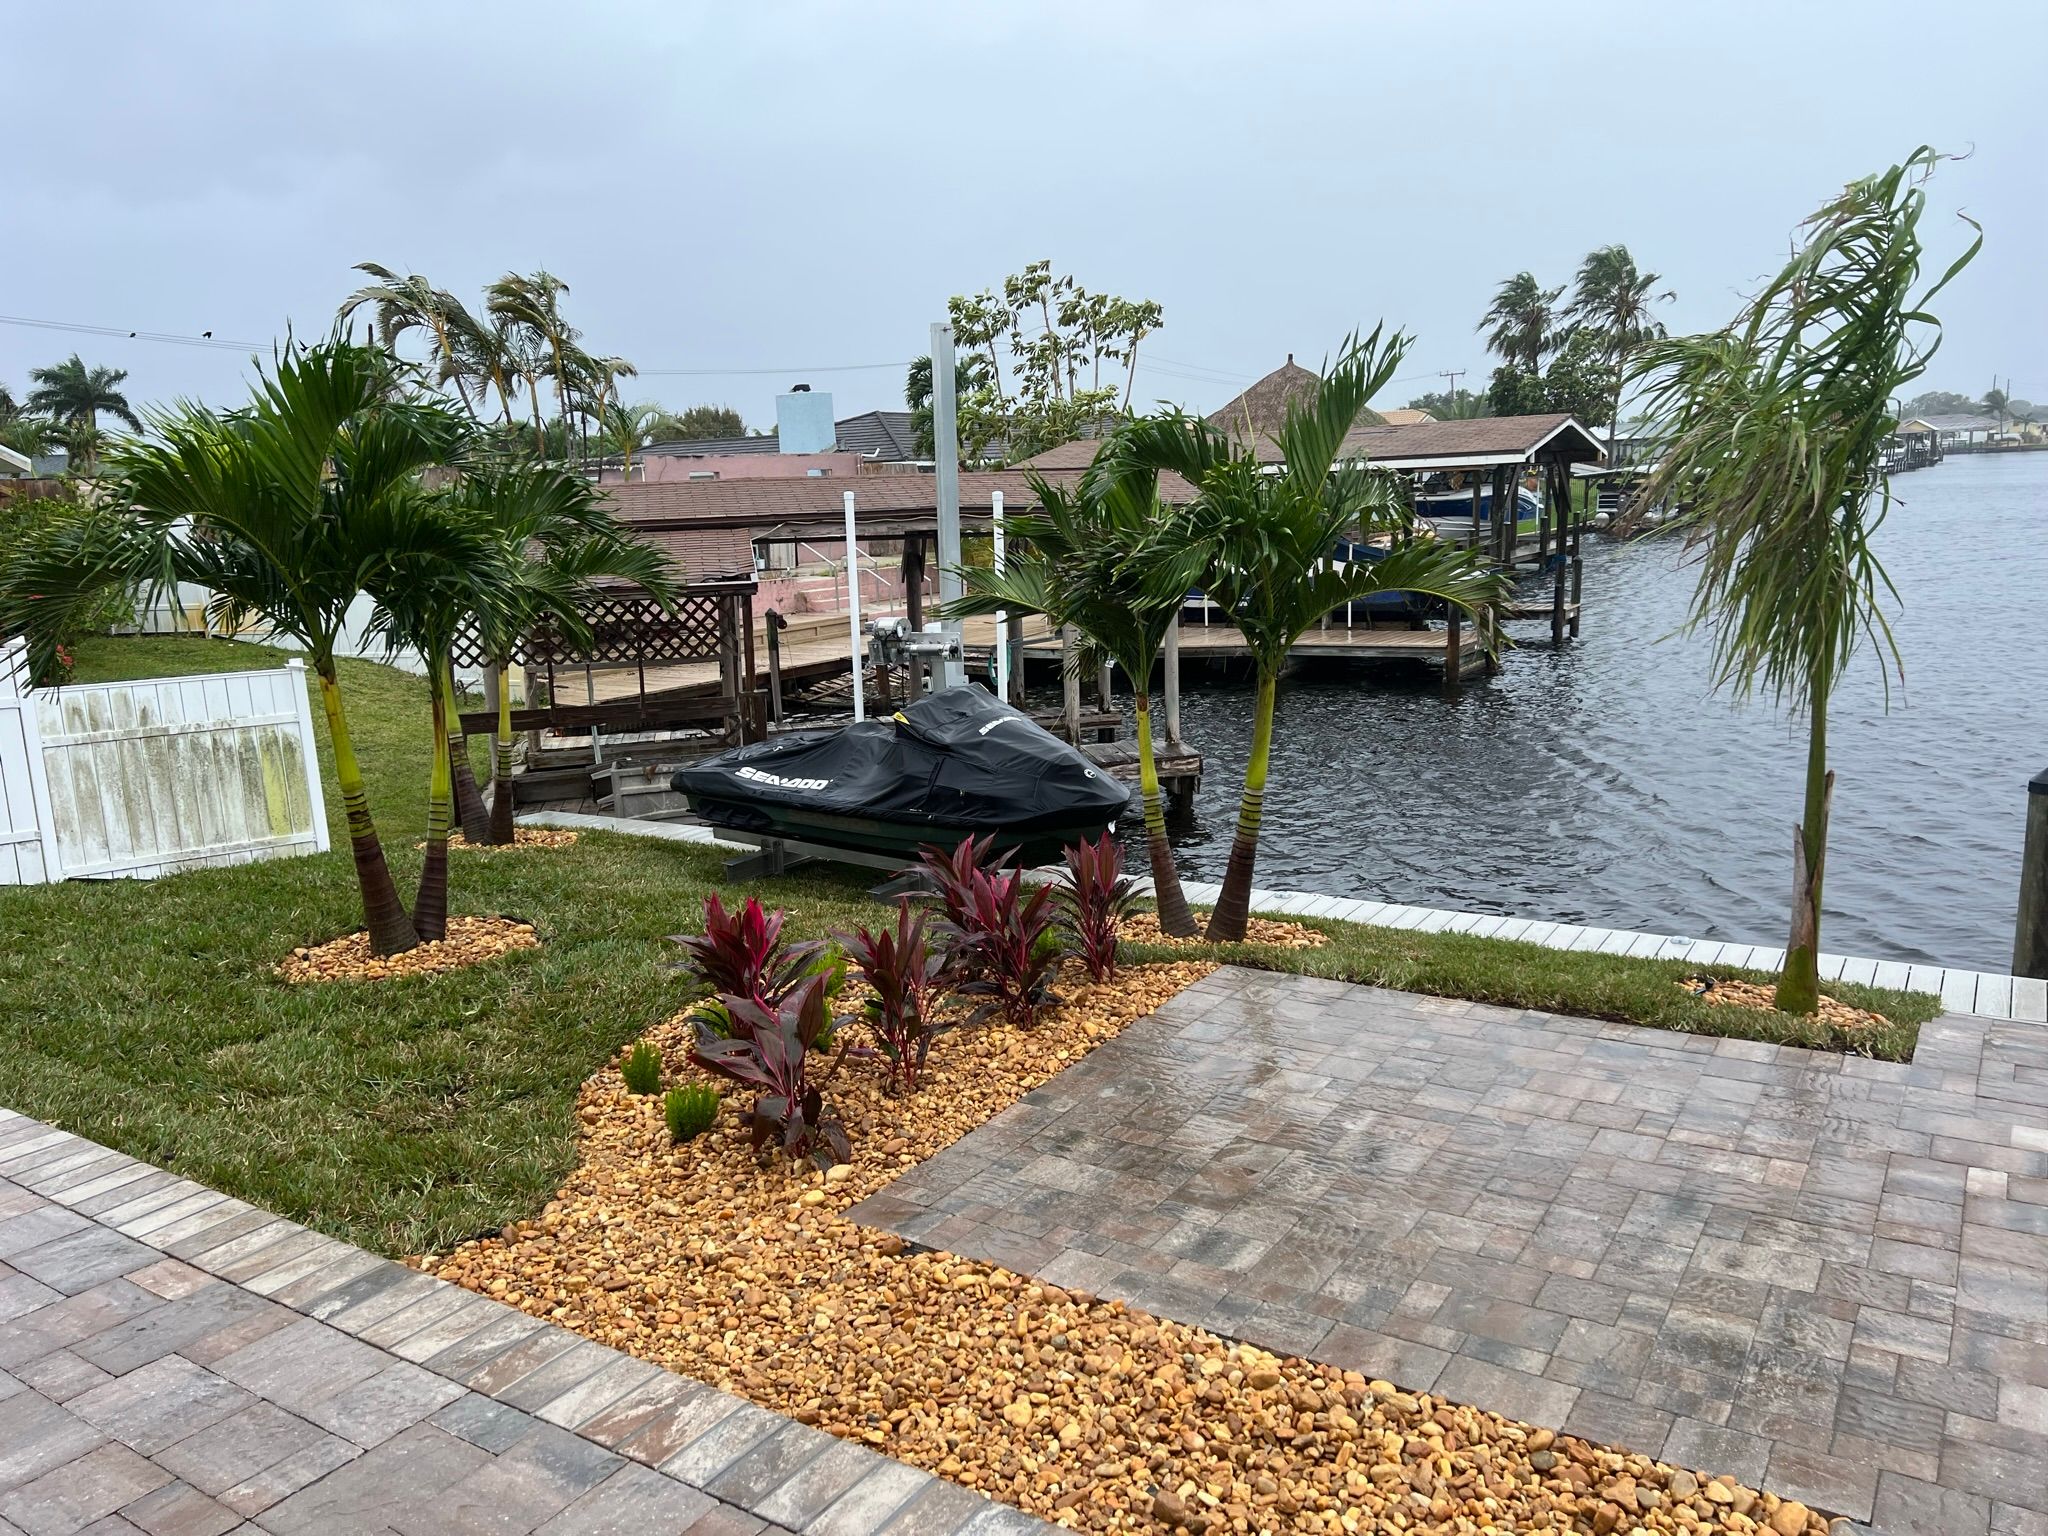 All Photos for Isaiah Simmons Construction and Landscaping LLC in Brevard County, Florida